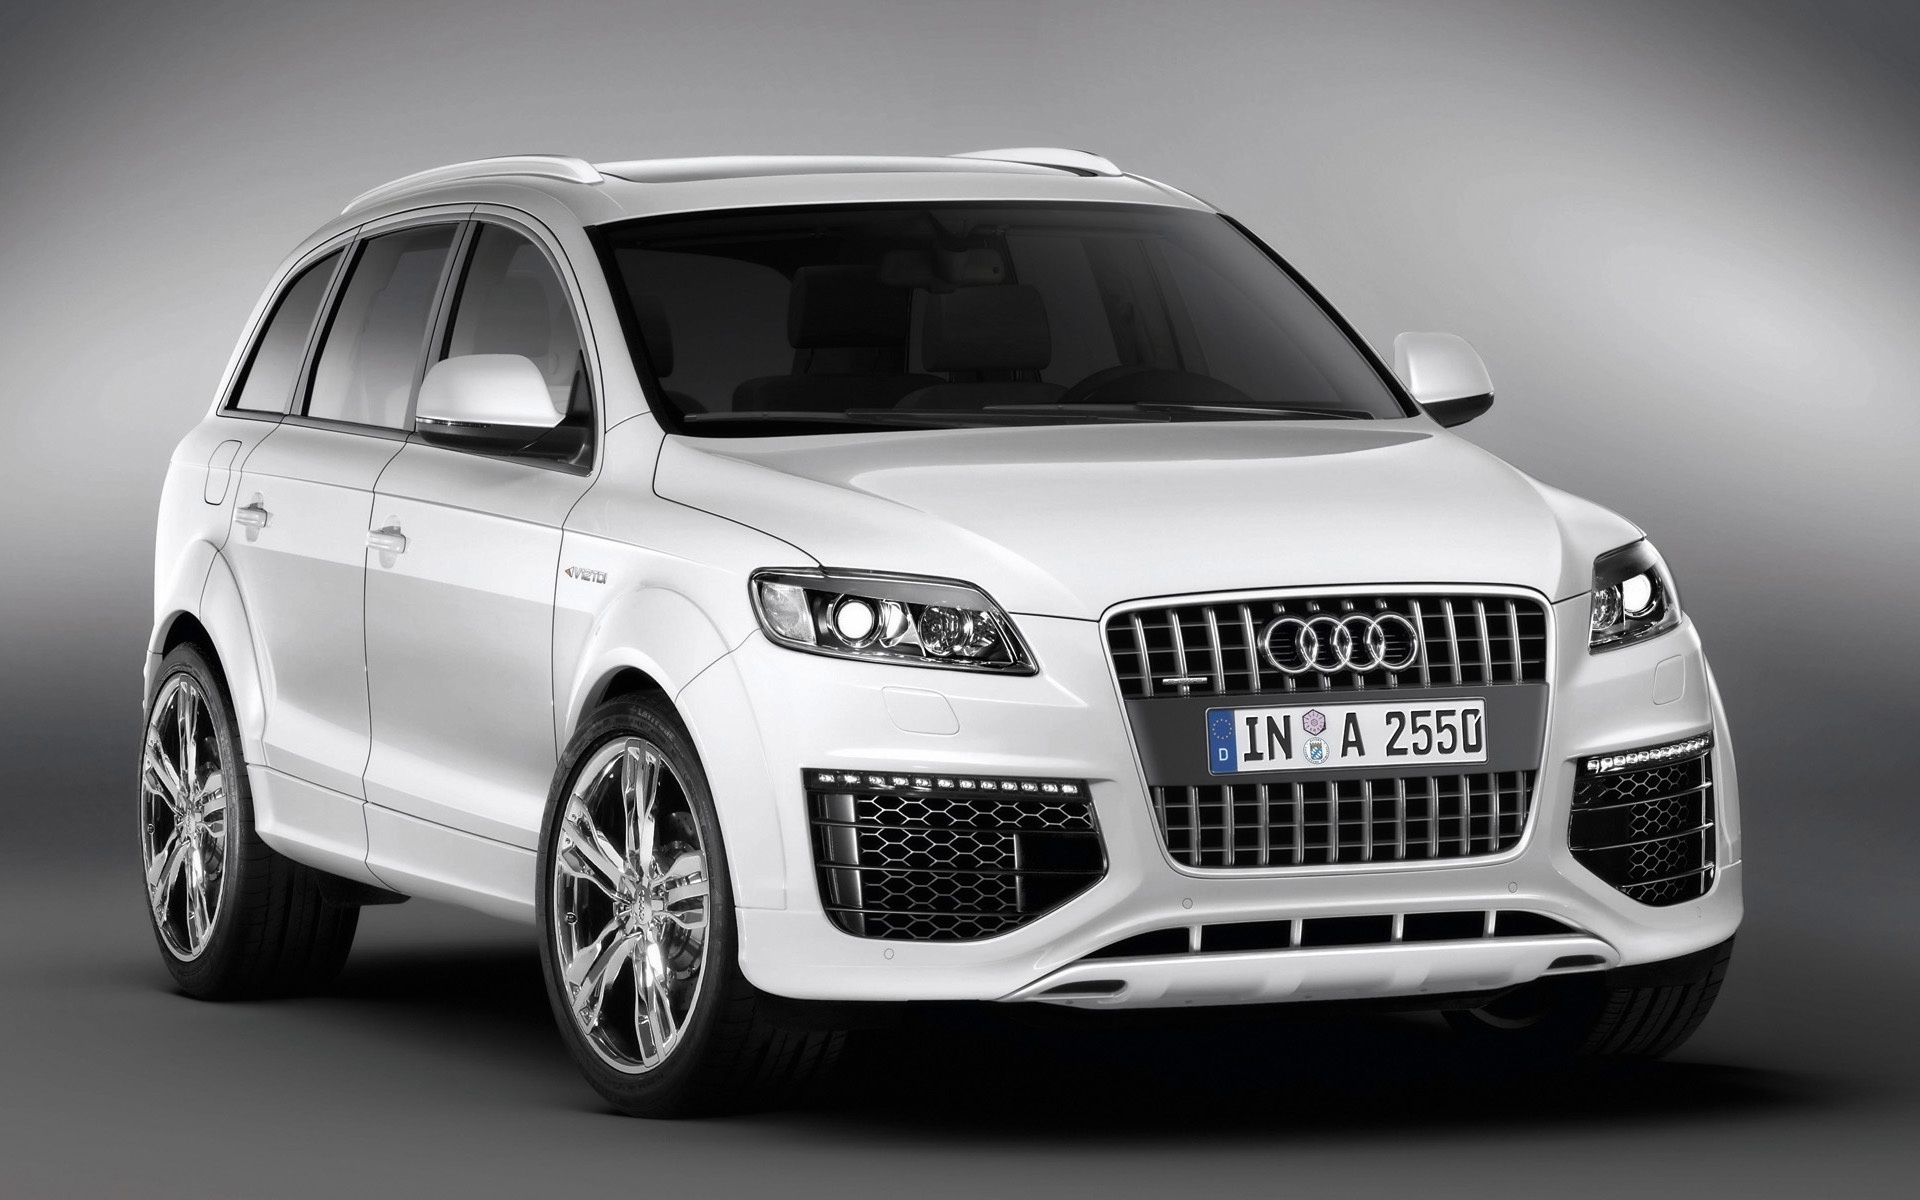 Audi Q7 Coastline front and side for 1920 x 1200 widescreen resolution